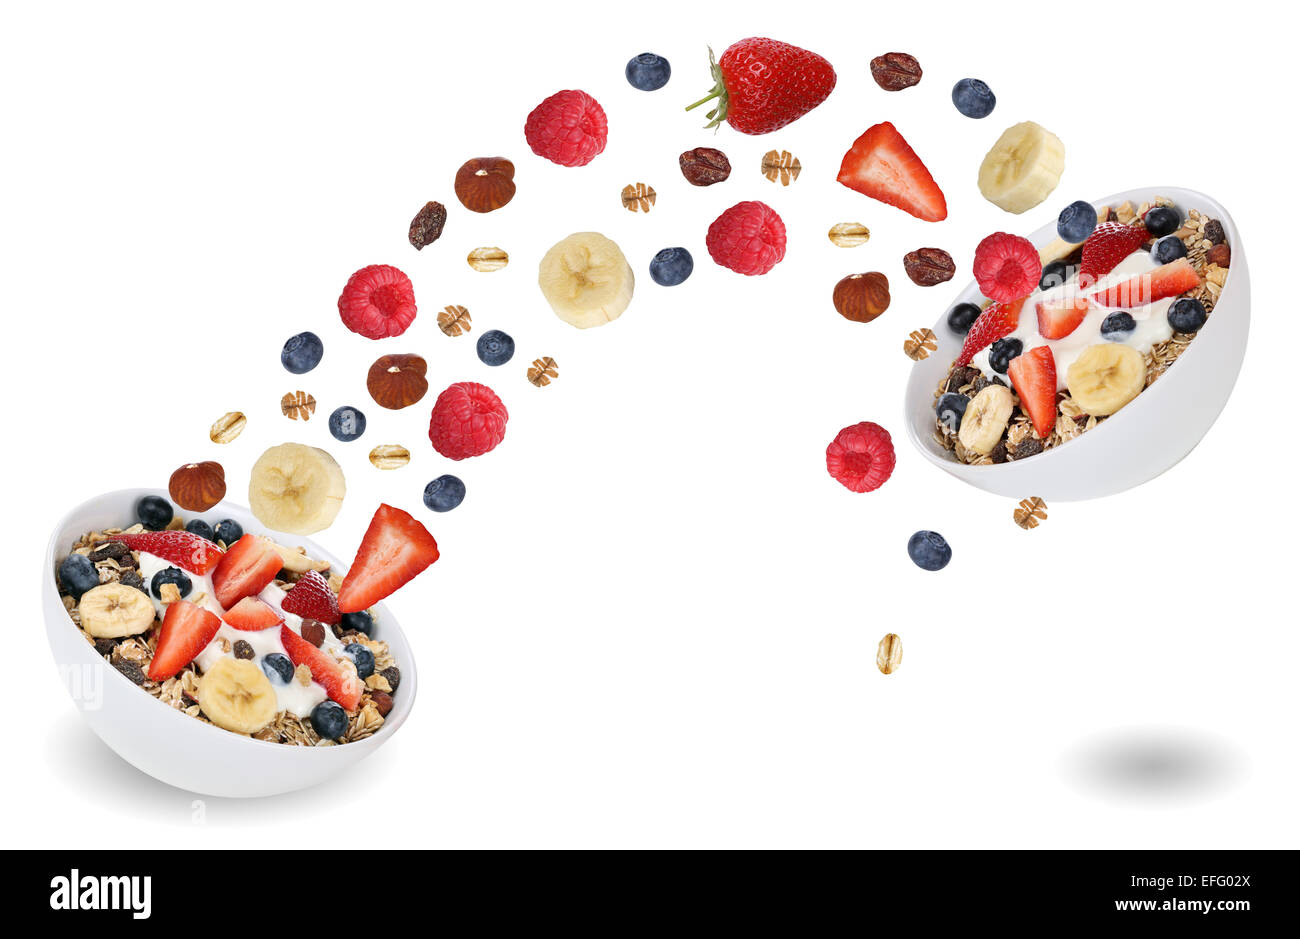 Flying fruits from fruit muesli for breakfast with raspberry, blueberries, banana and strawberry Stock Photo